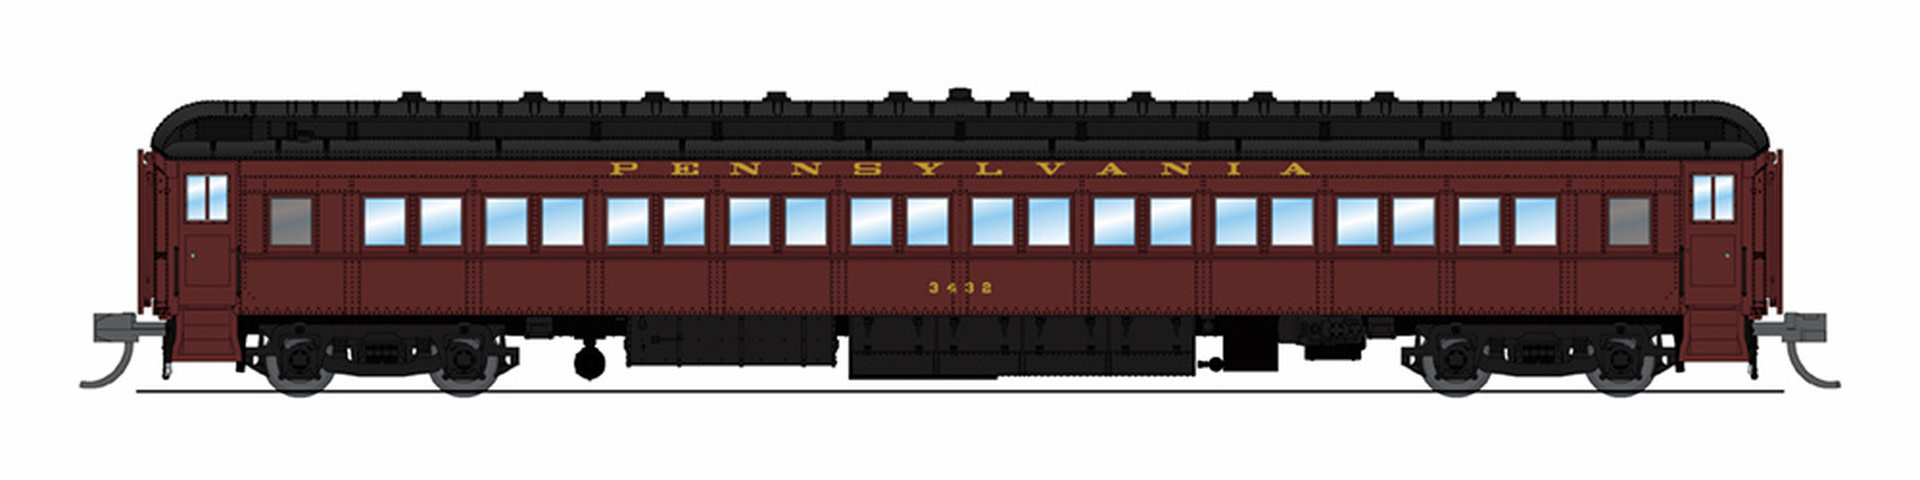 Broadway Limited #6519, Broadway Limited Imports pRR P70 Coach with Ice AC, 2-Pack